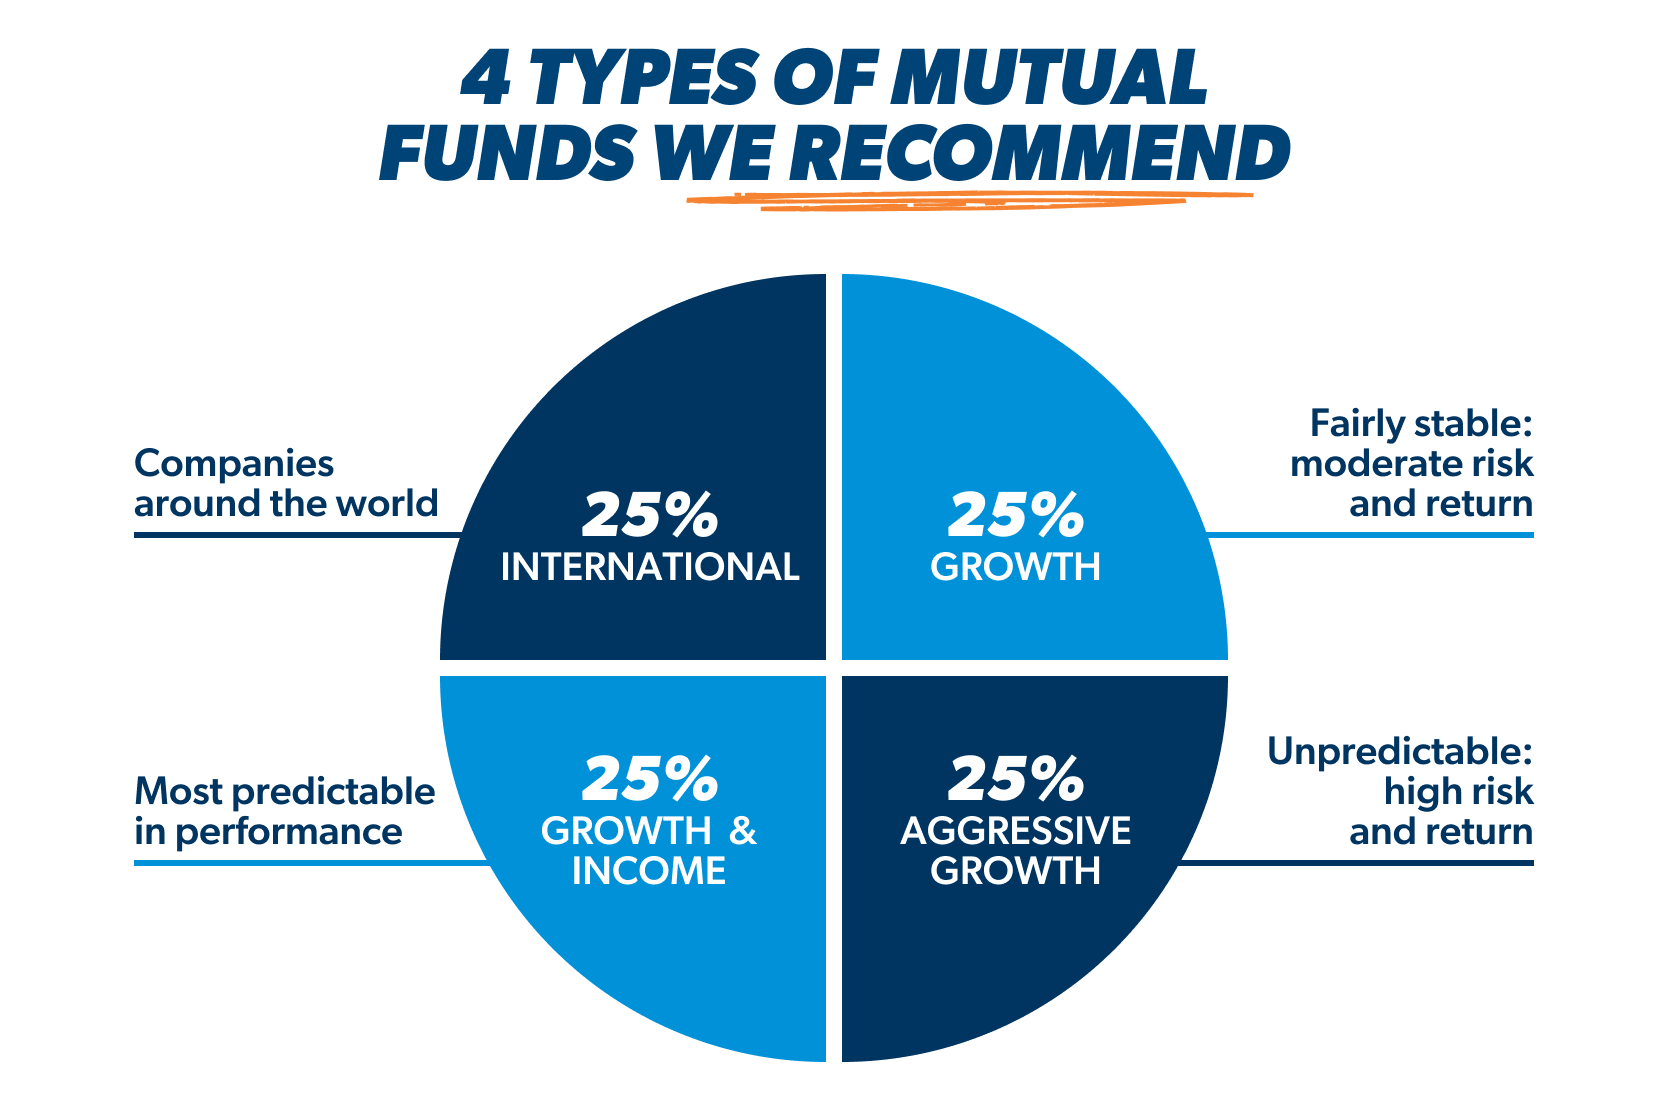 4 types of mutual funds